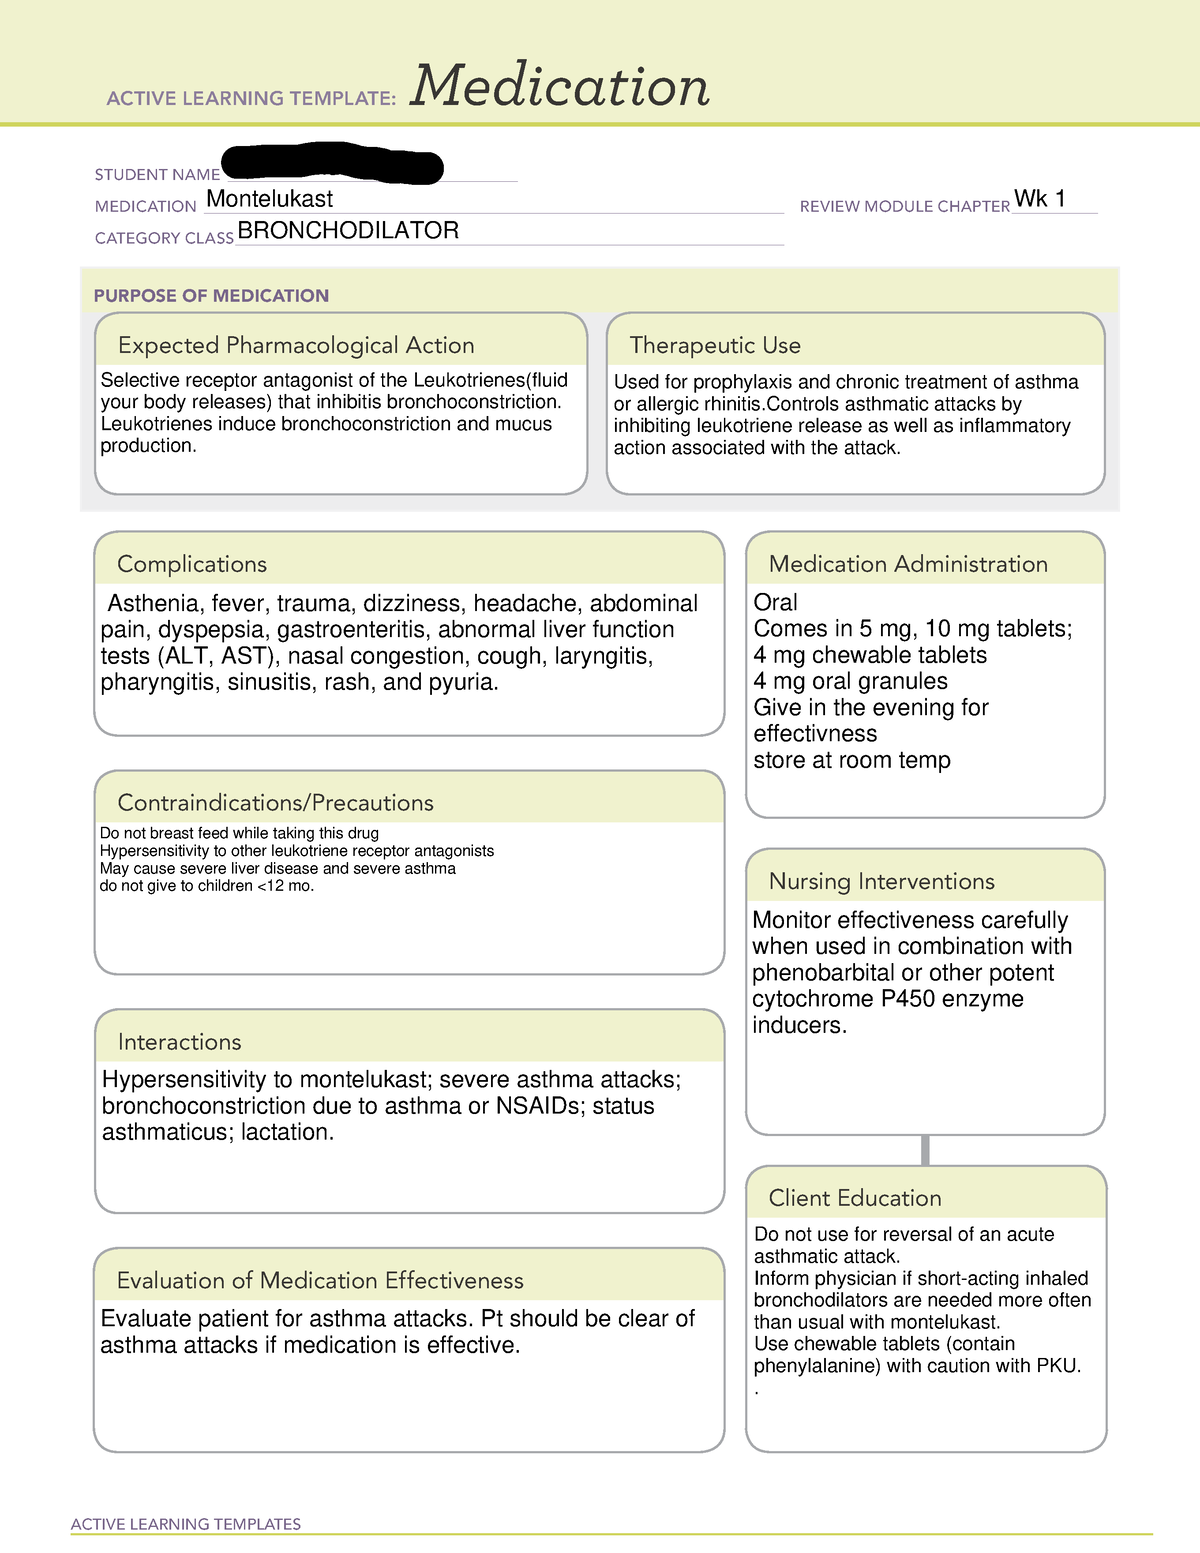 Montelukast med card ACTIVE LEARNING TEMPLATES Medication STUDENT